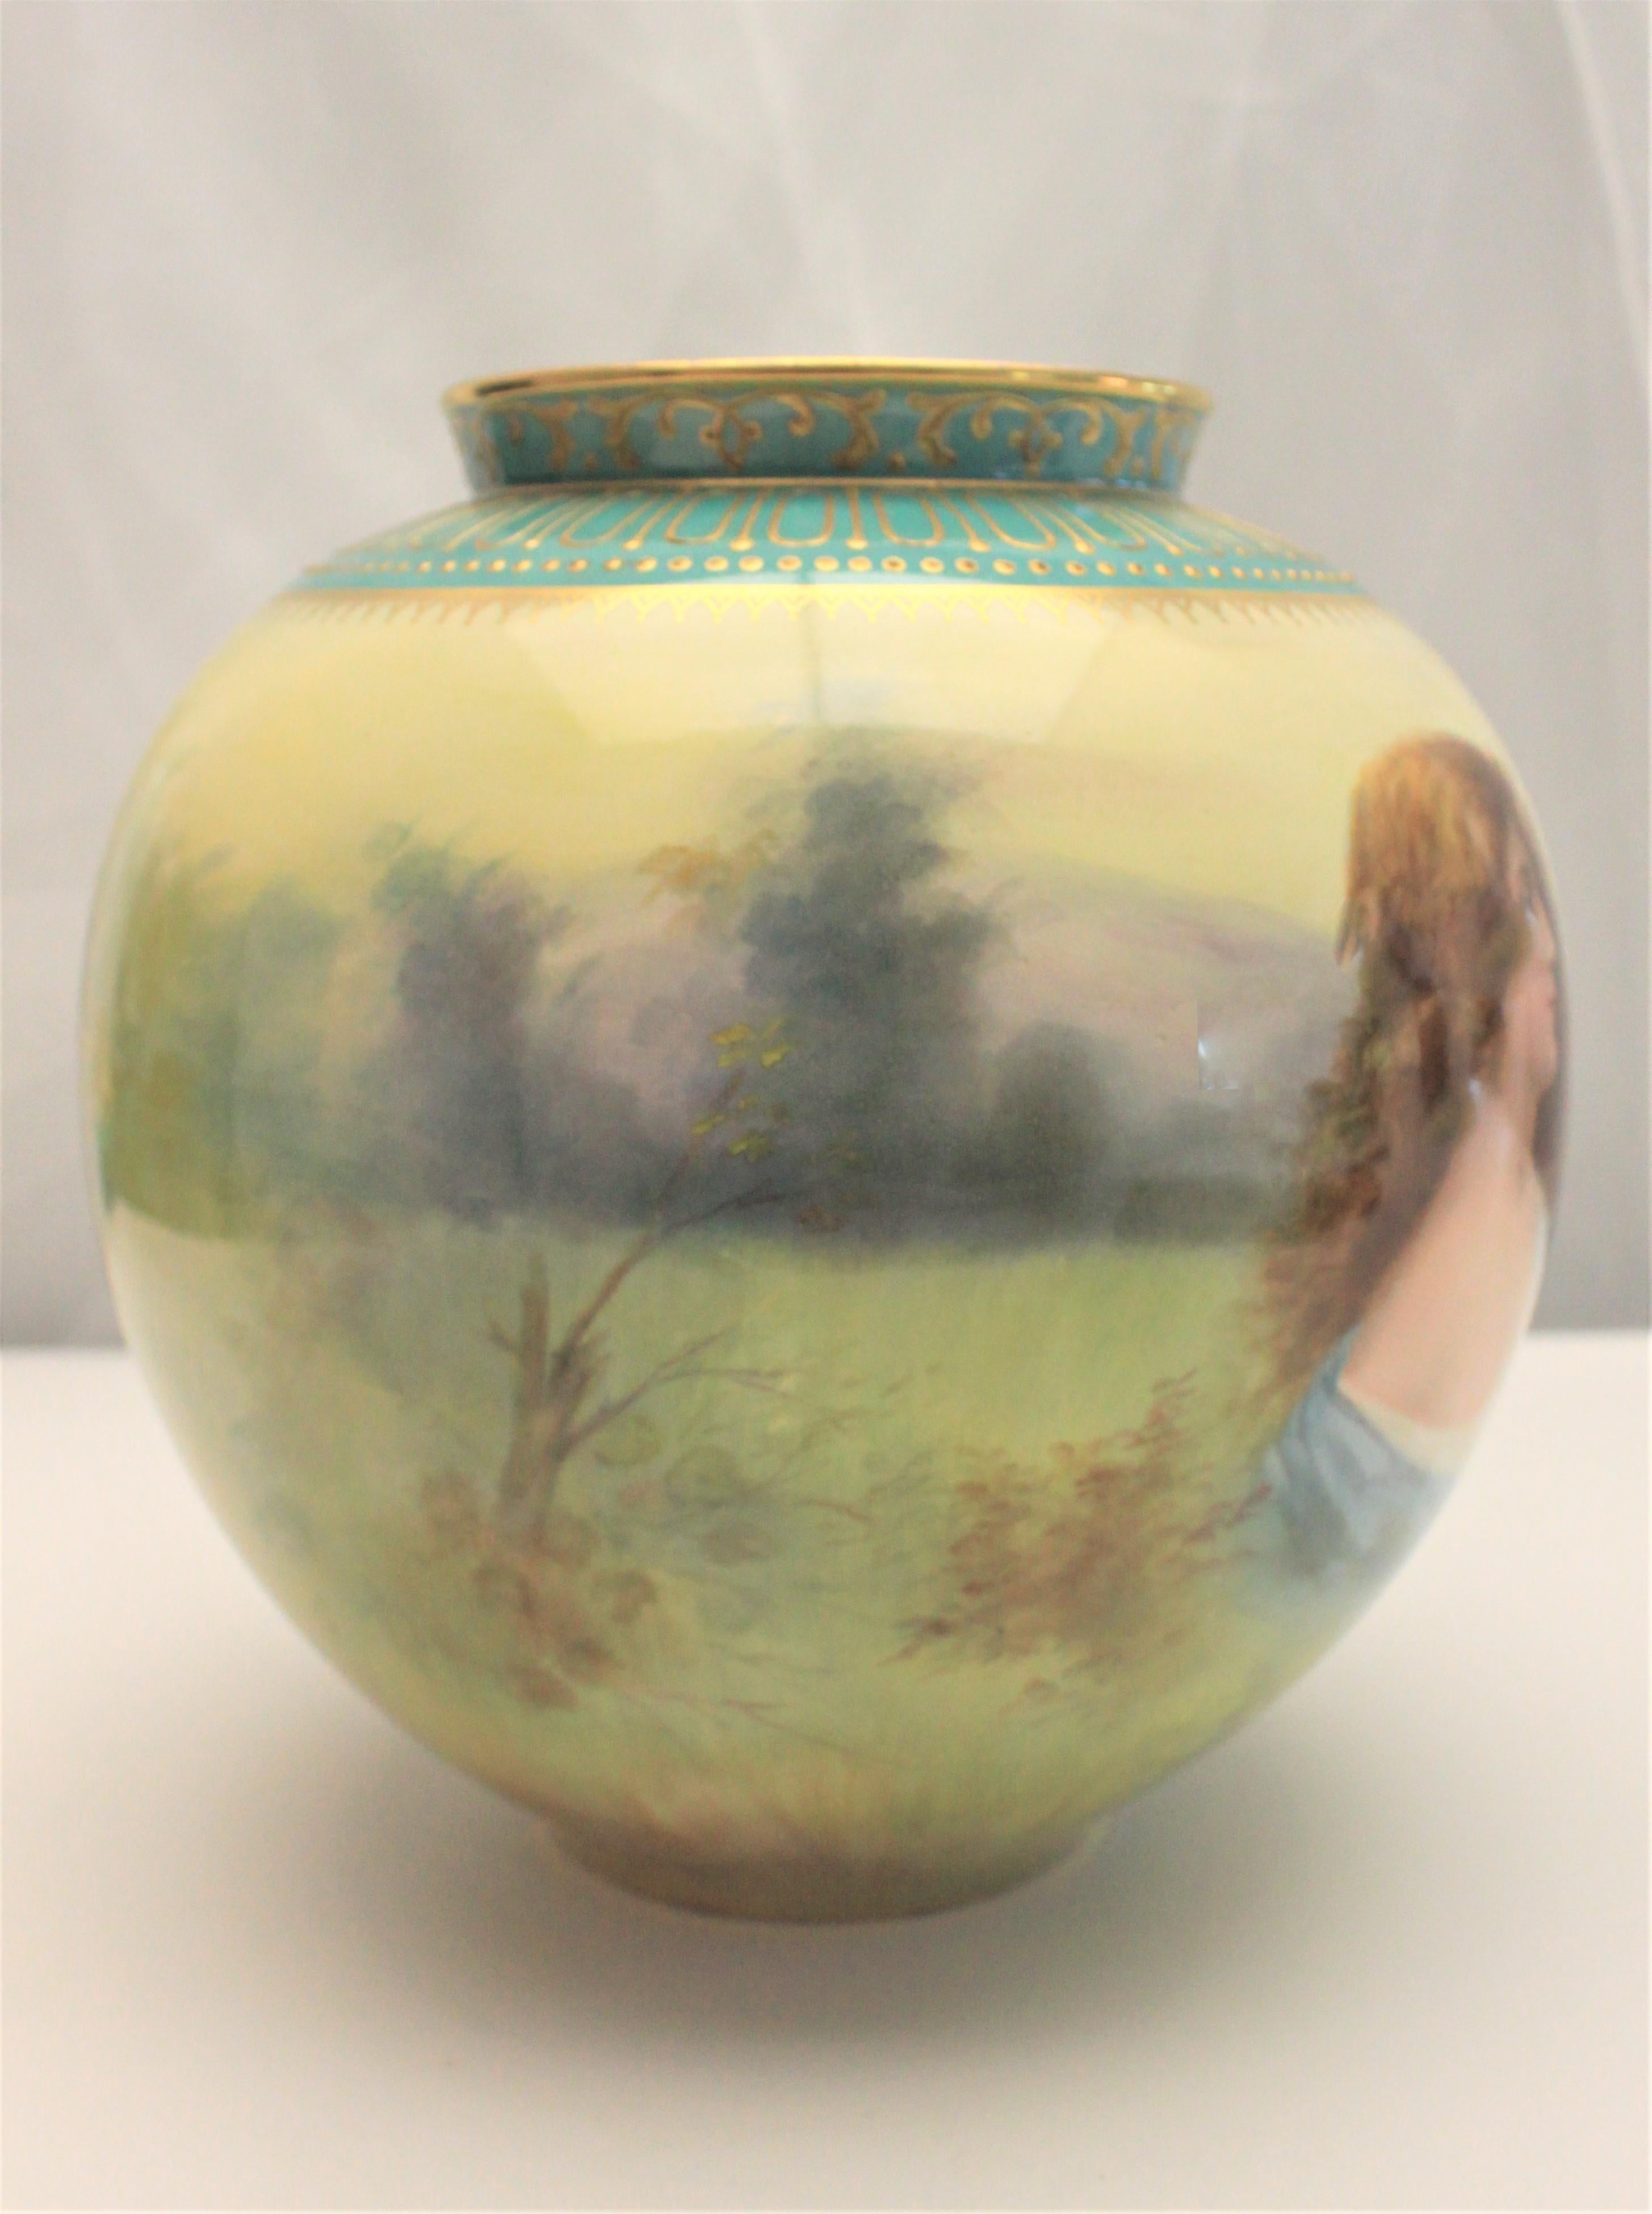 This portrait vase was made by Royal Bonn of Germany and dates between the years of 1880 and 1920. The vase is done in pastel hues with a very well executed portrait of a woman signed 